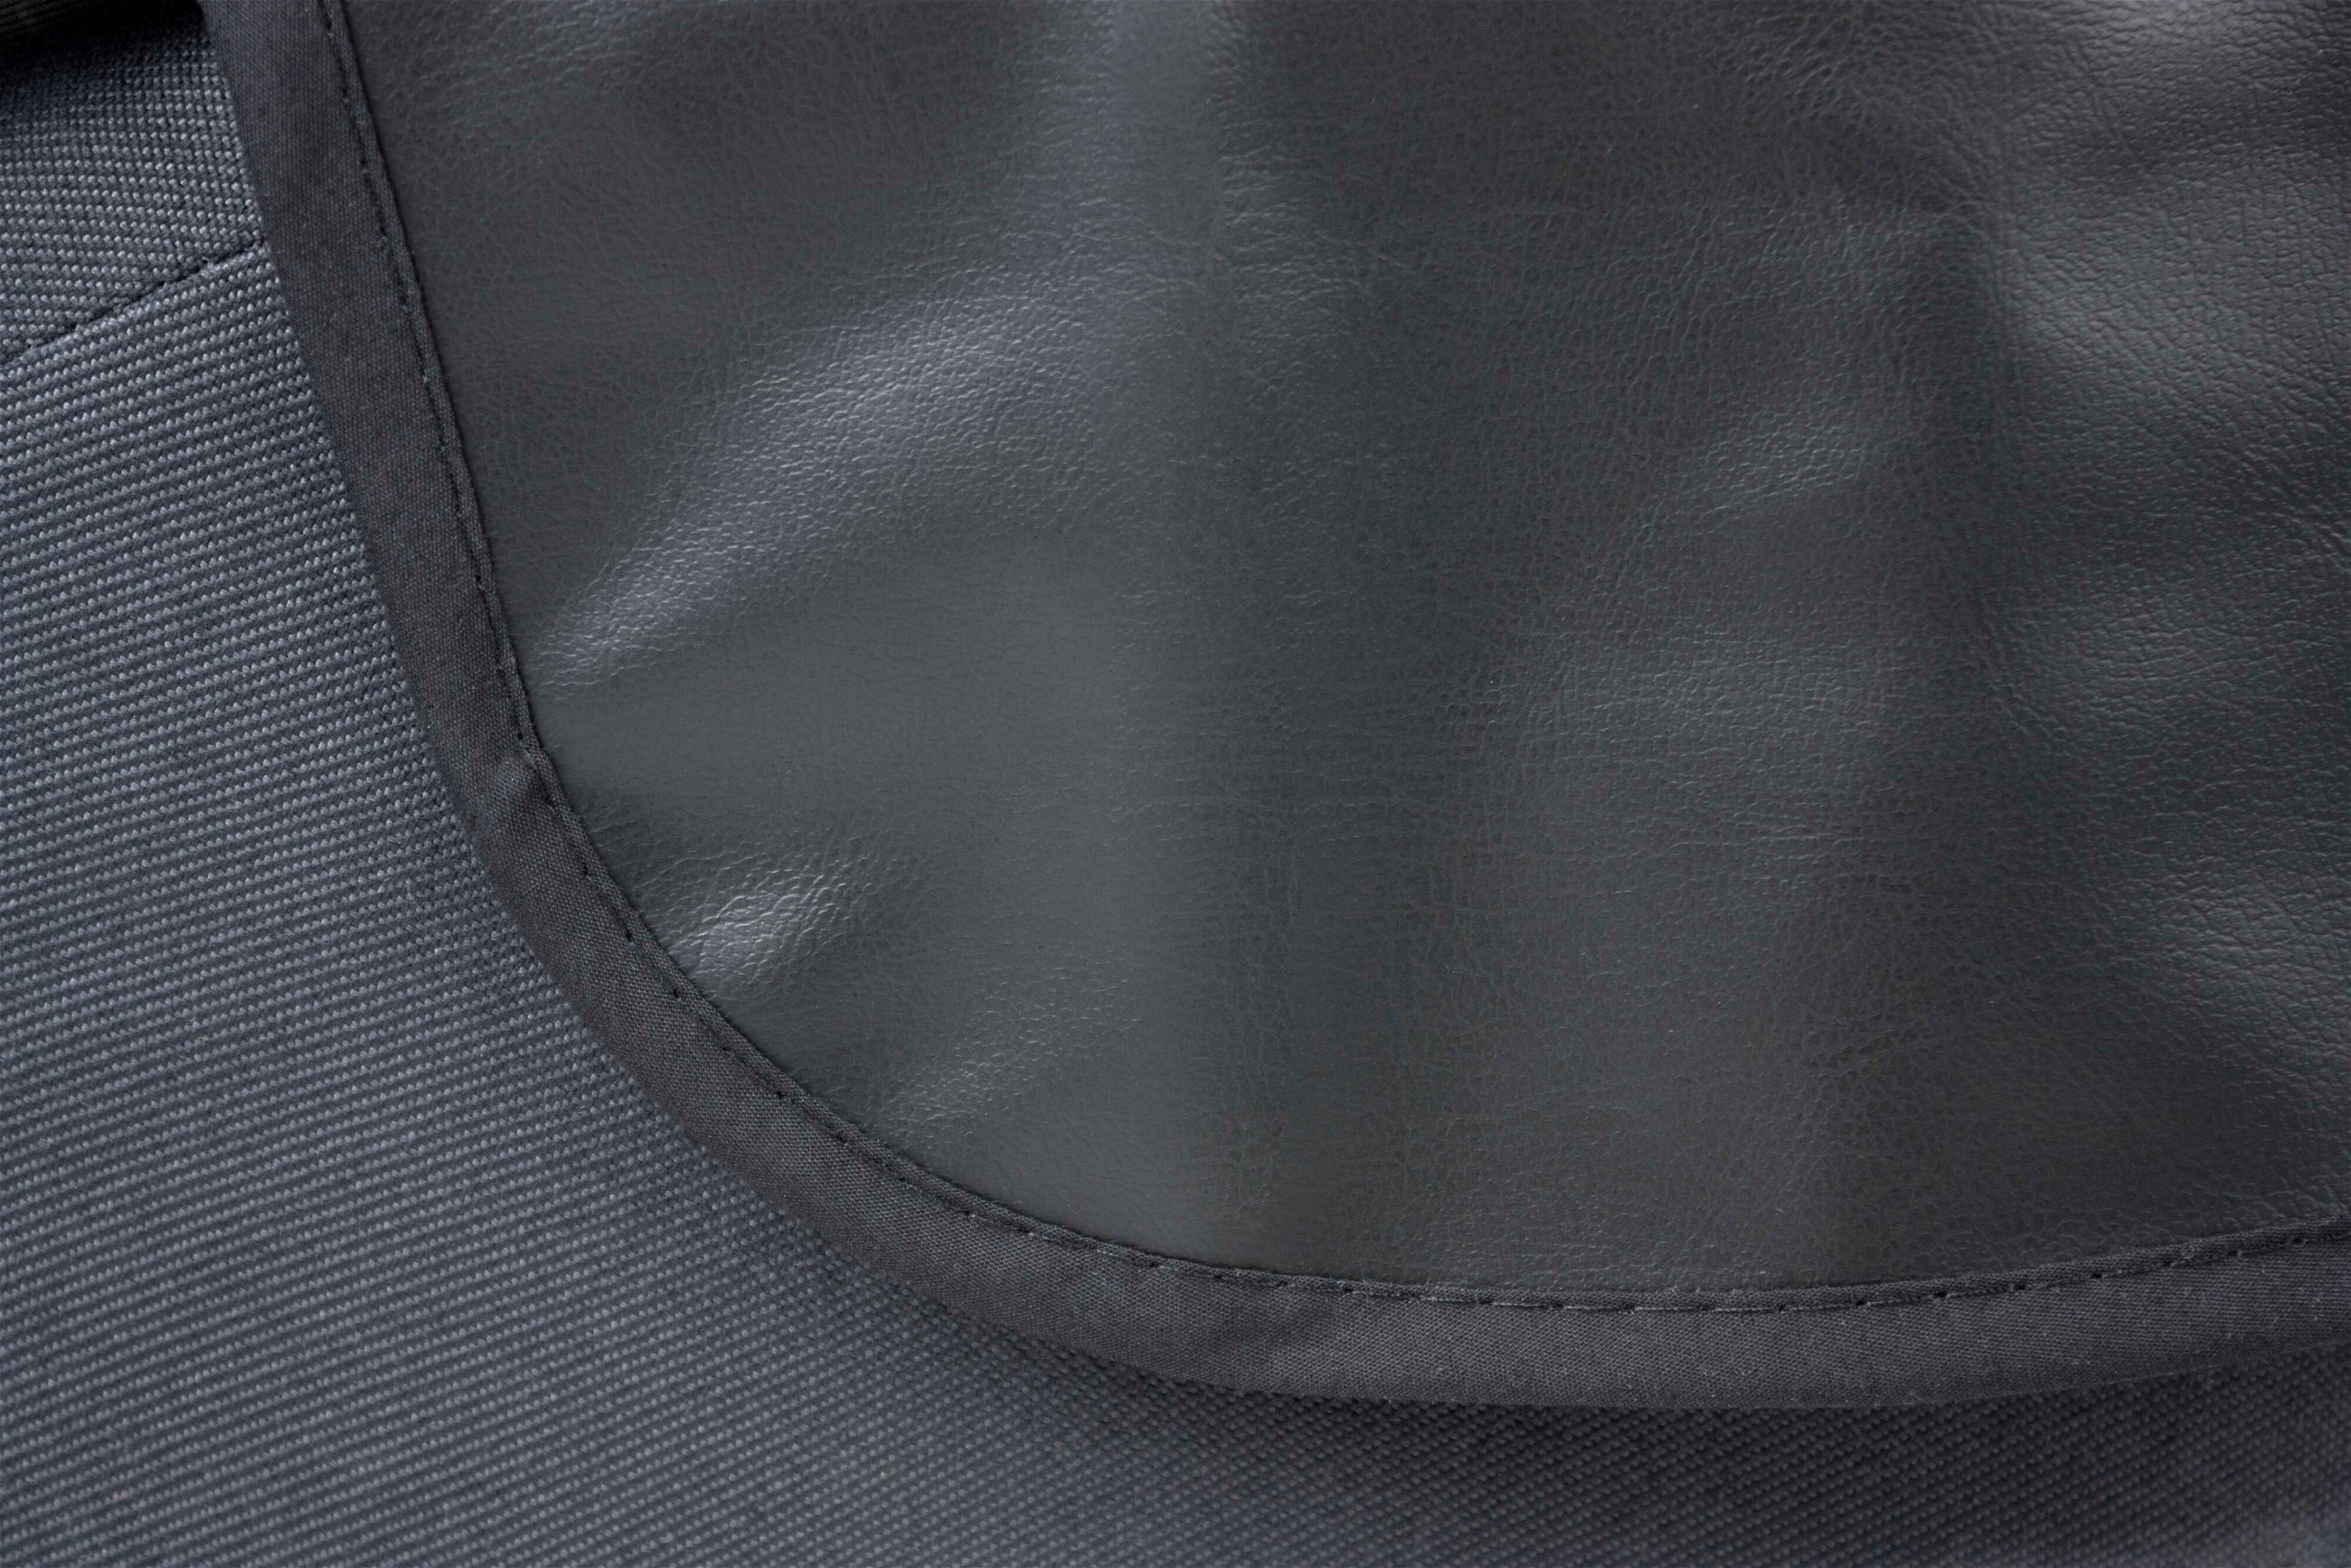 Car seat workshop protector Clean Tony from imitation leather